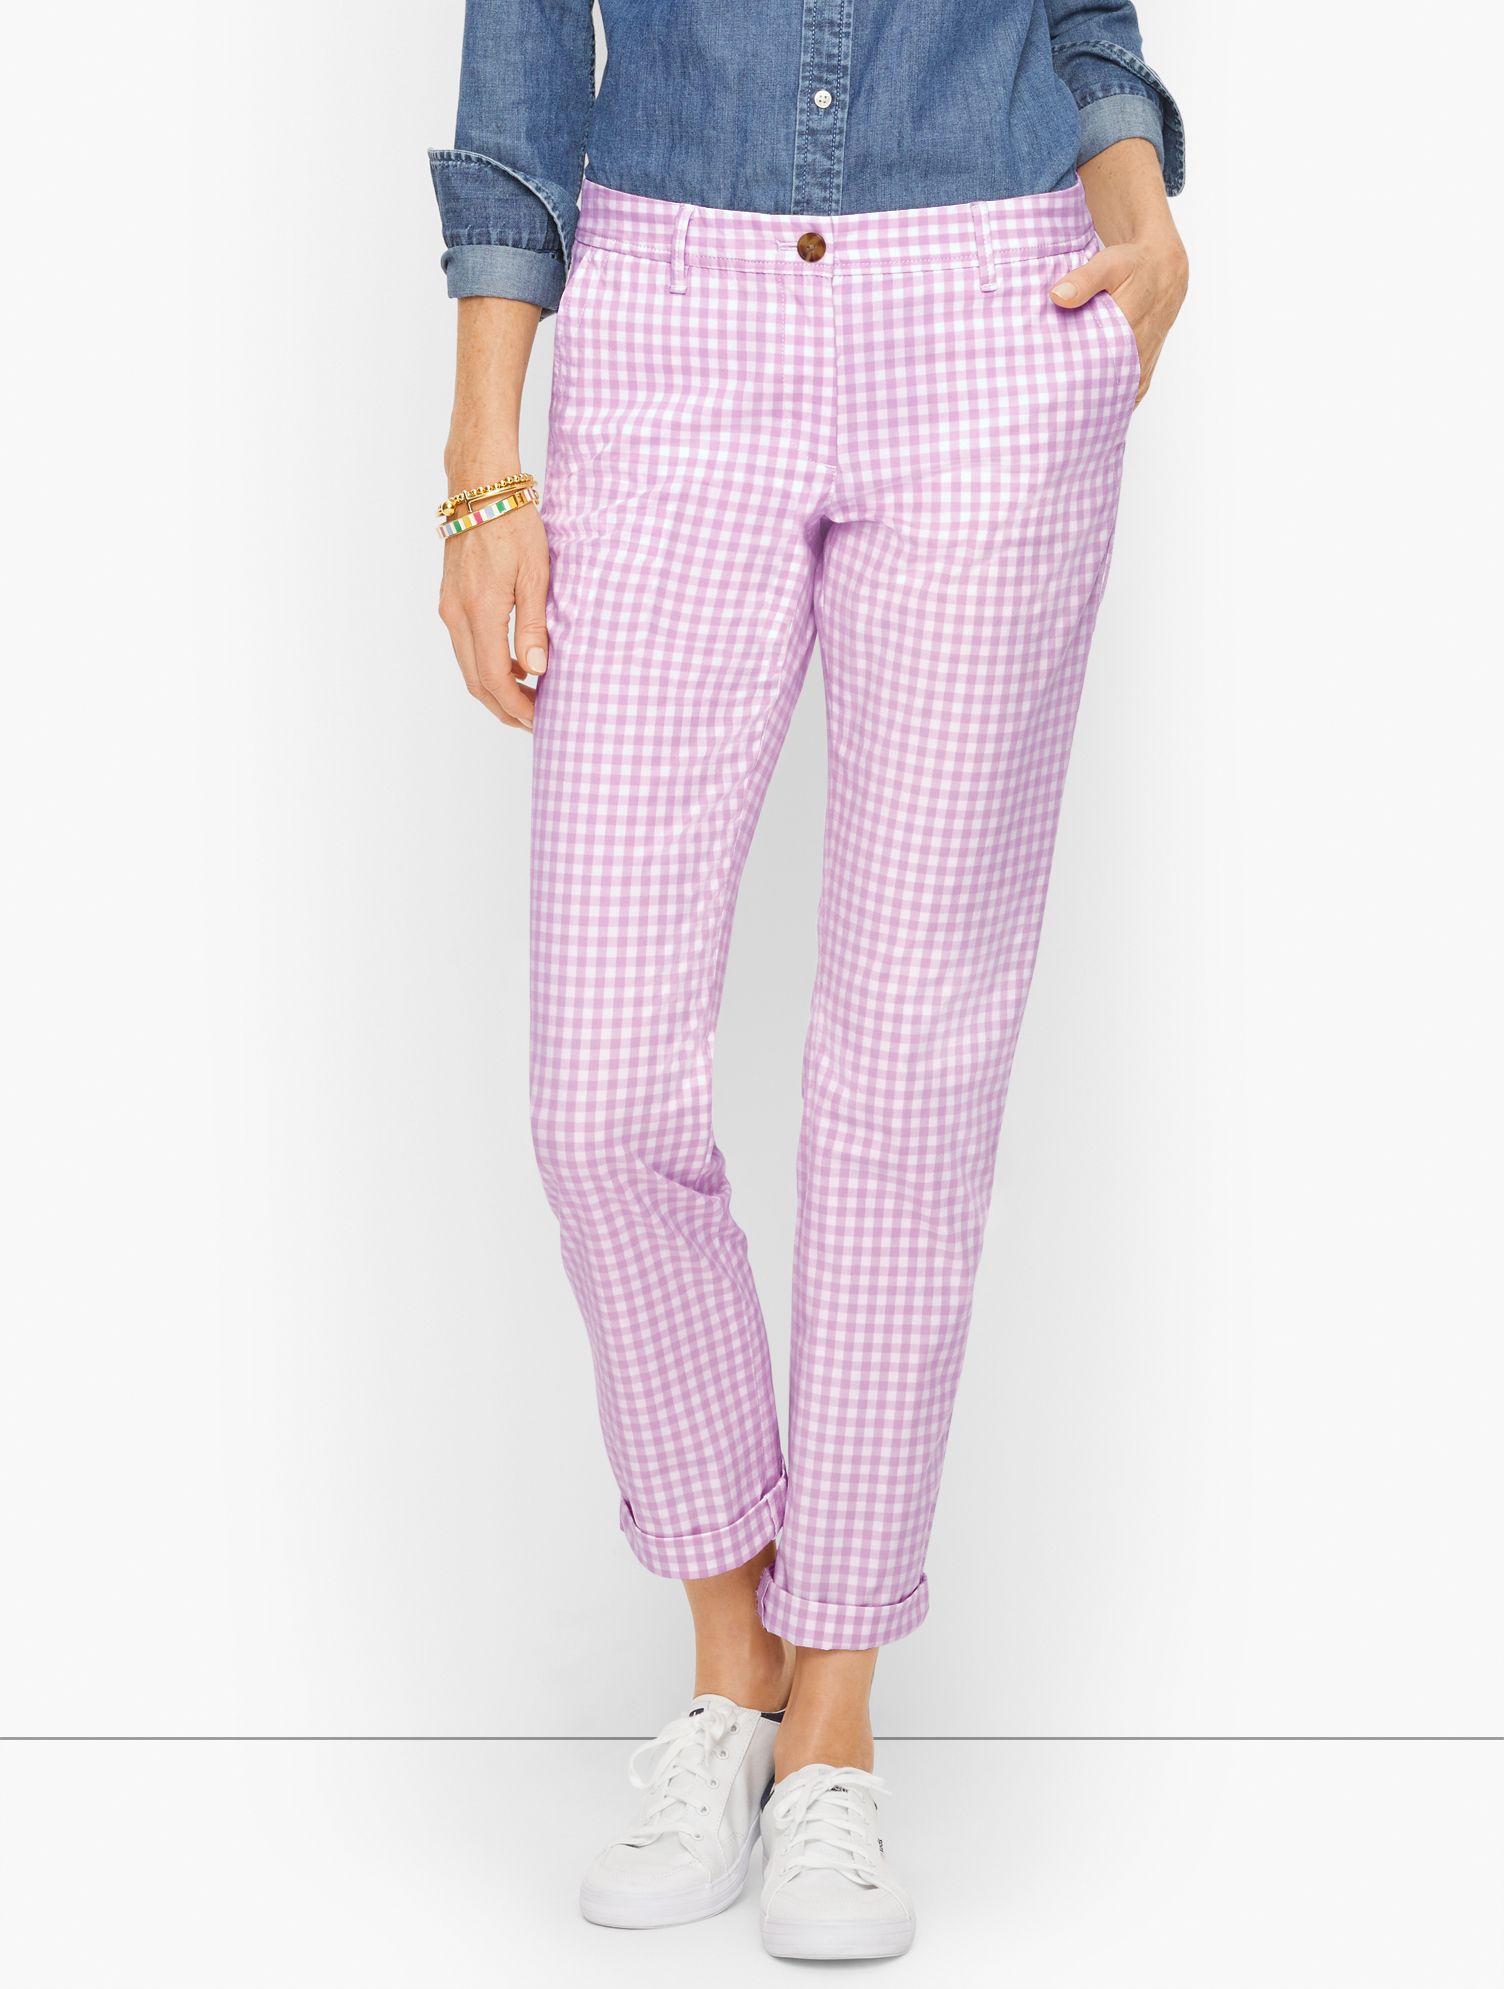 Relaxed Chinos Pants - Perfect Check - Orchid Mist - 10 Talbots | Talbots